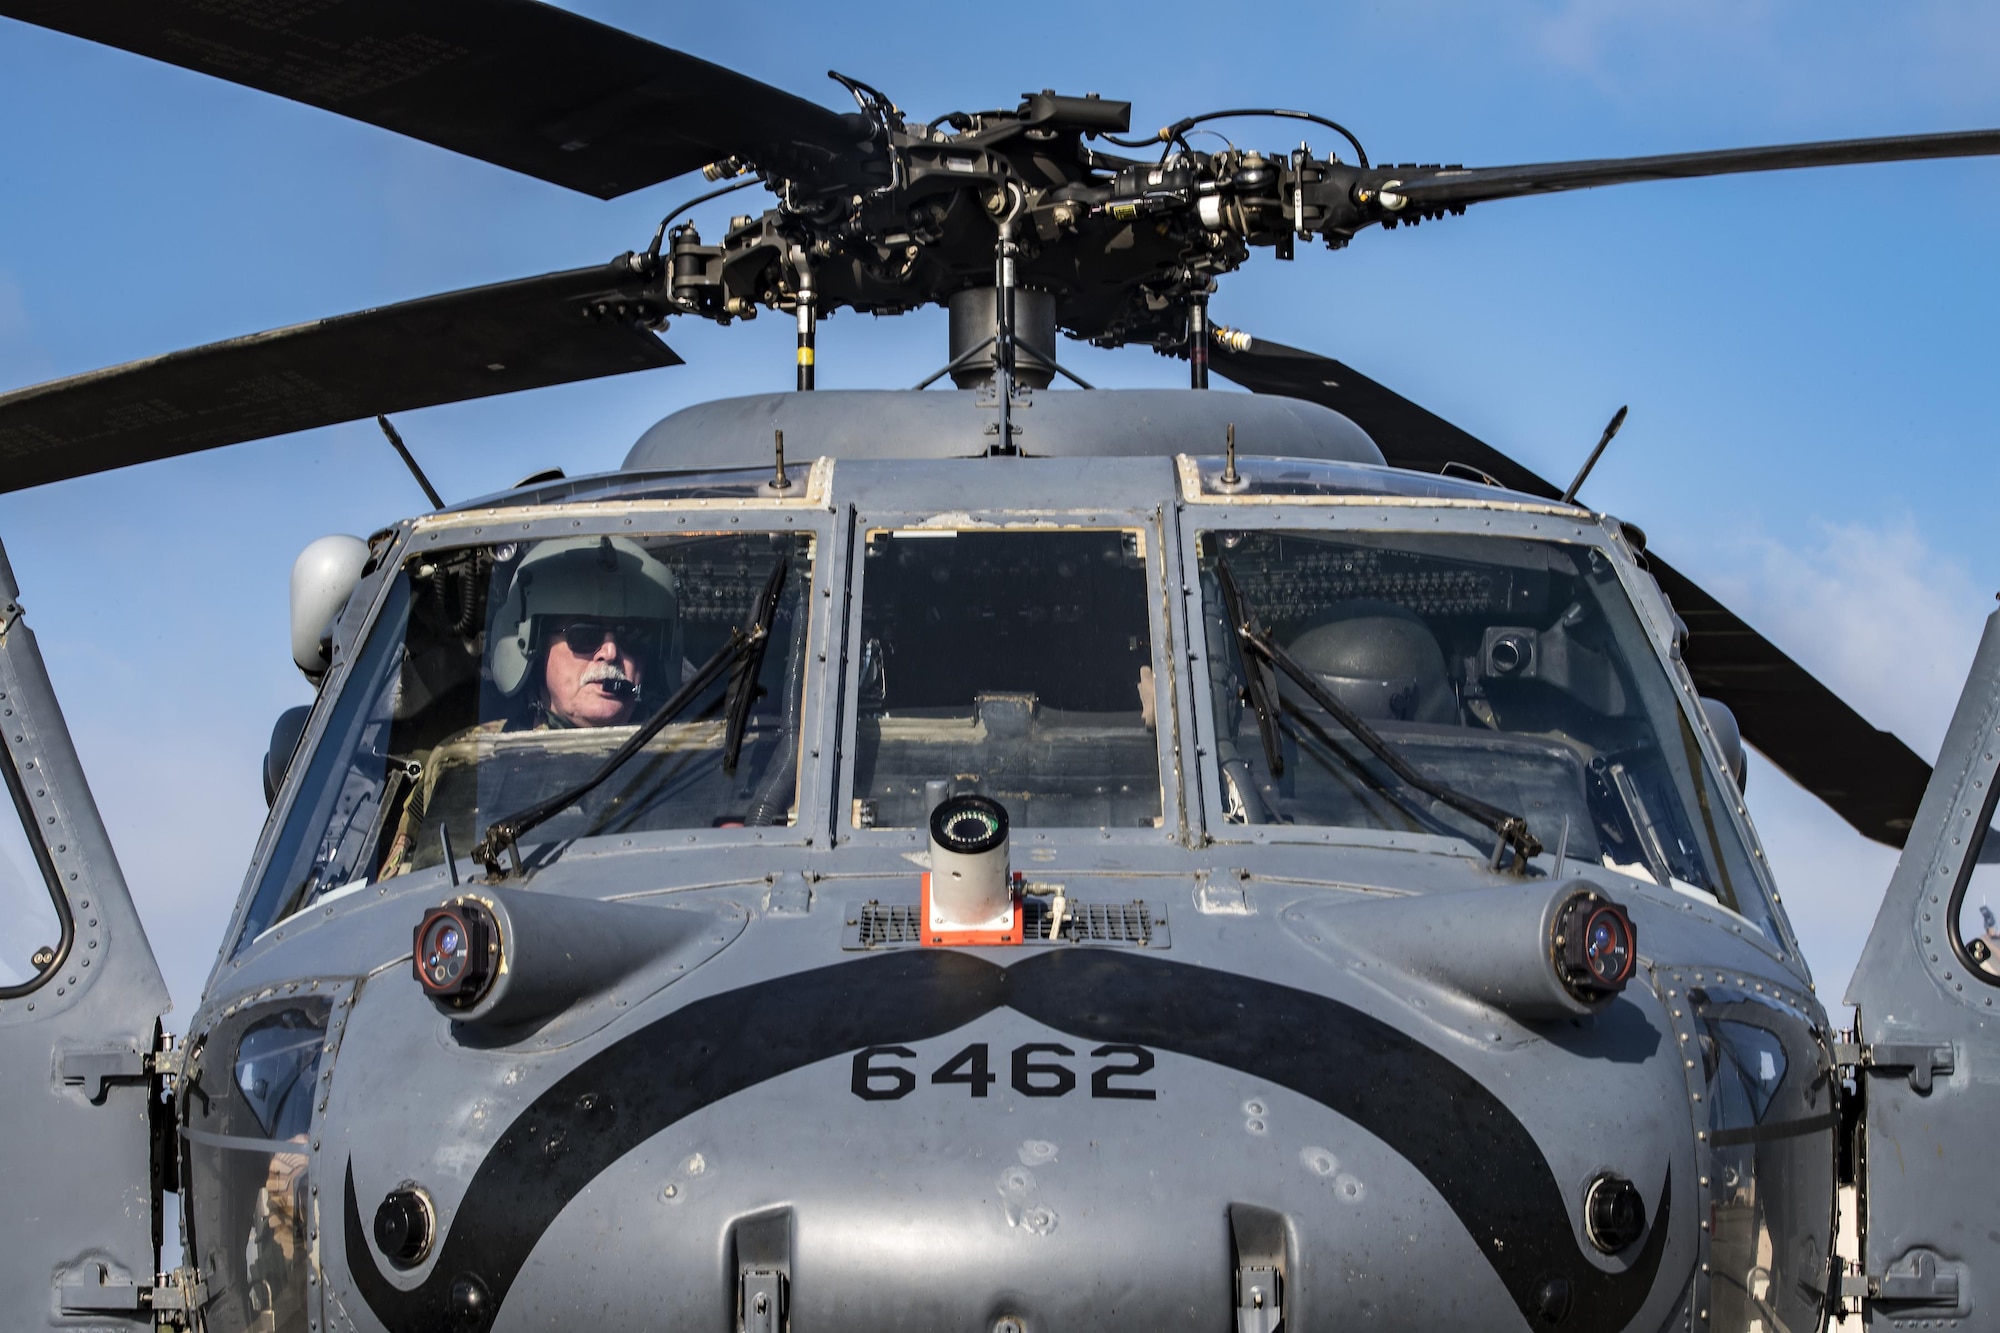 Retired U.S. Army Chief Warrant Officer 3, James Turnage Sr., 41st Helicopter Maintenance Unit contractor maintenance pilot, left, performs a preflight systems check, March 22, 2017, at Moody Air Force Base, Ga. The 41st HMU is responsible for Moody’s Pave Hawk fleet. Through innovation and preventative maintenance, they ensure each of their 13 Pave Hawks receive the upkeep needed to accomplish the mission. (U.S. Air Force photo by Airman 1st Class Janiqua P. Robinson)